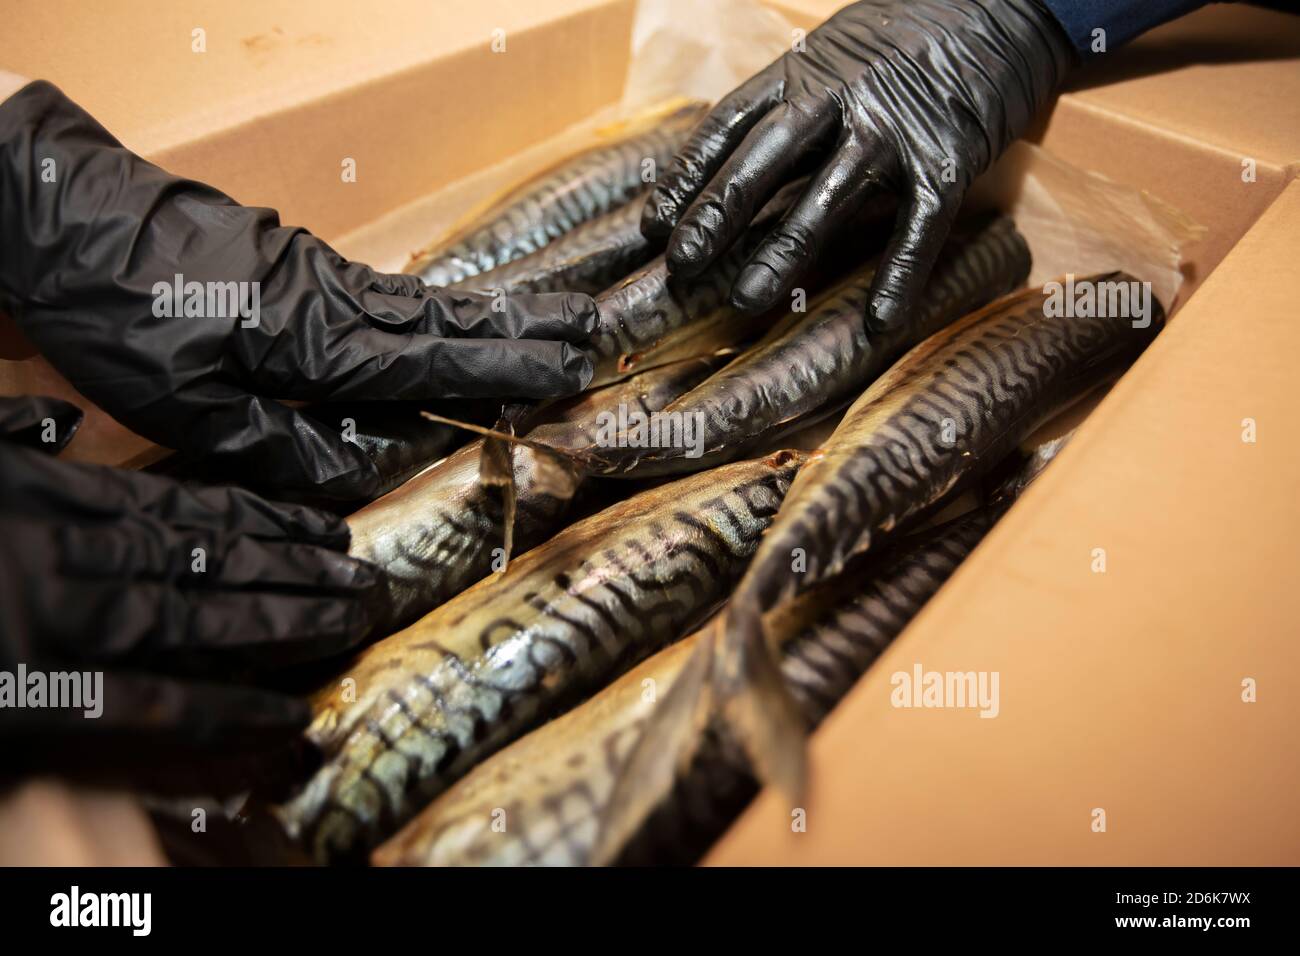 Smoked mackerel in a paper box. Fishing industry. Stock Photo